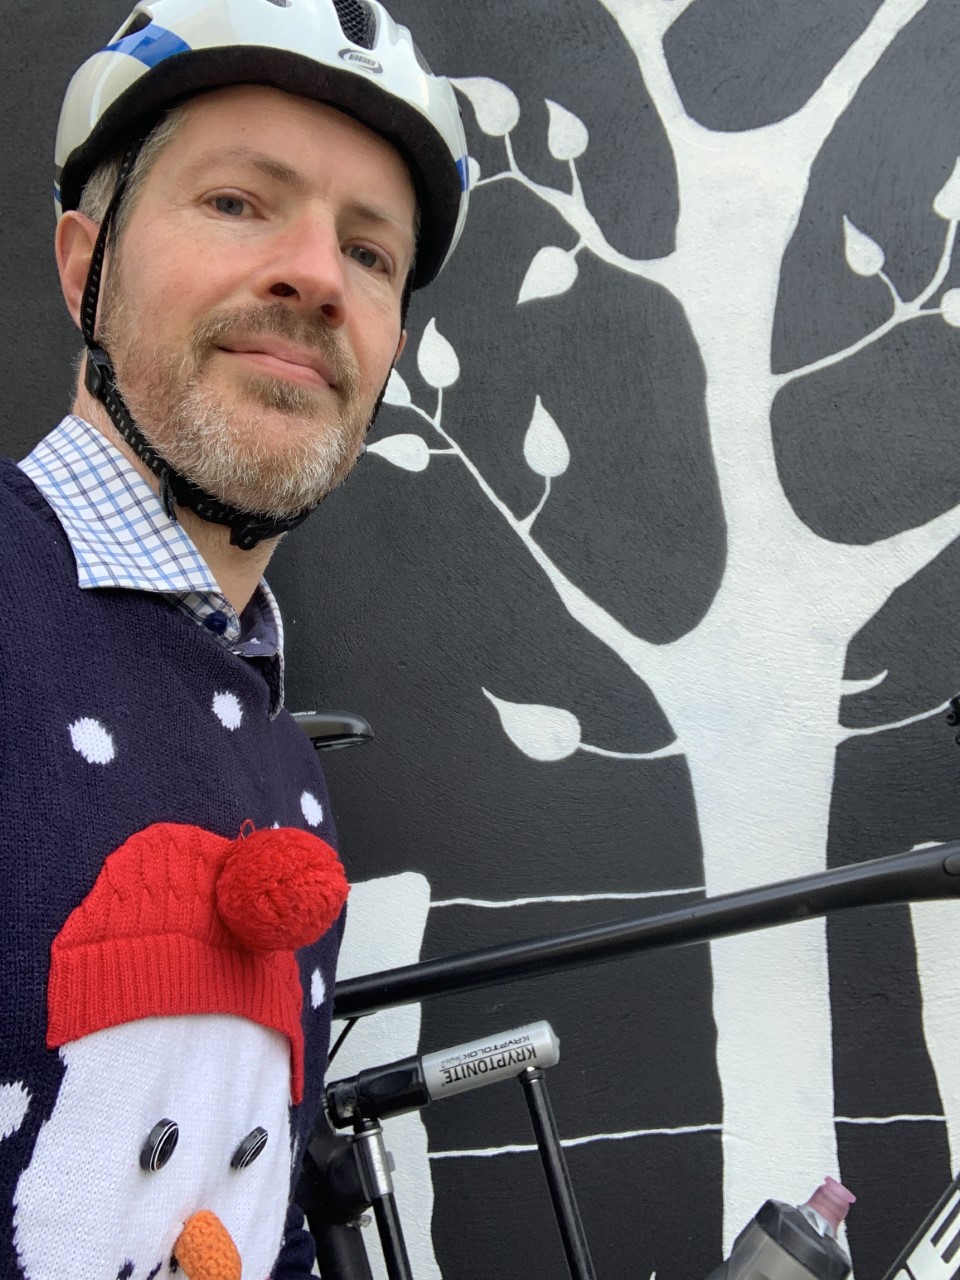 Solo Ride December 10th - 6th Day of Festive Rides!